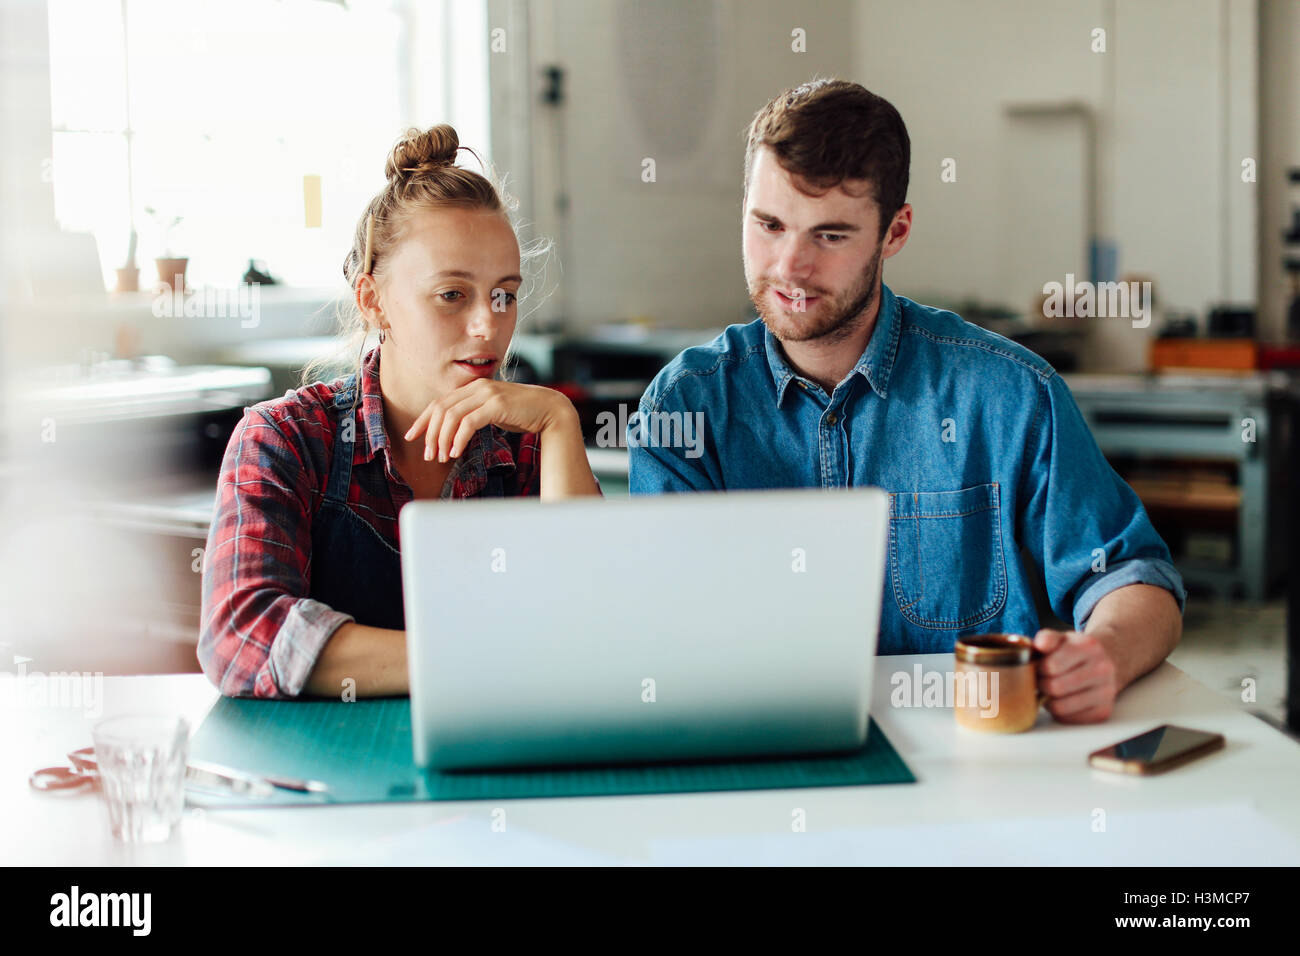 Young craftsman and craftswoman looking at laptop in print studio workshop Stock Photo